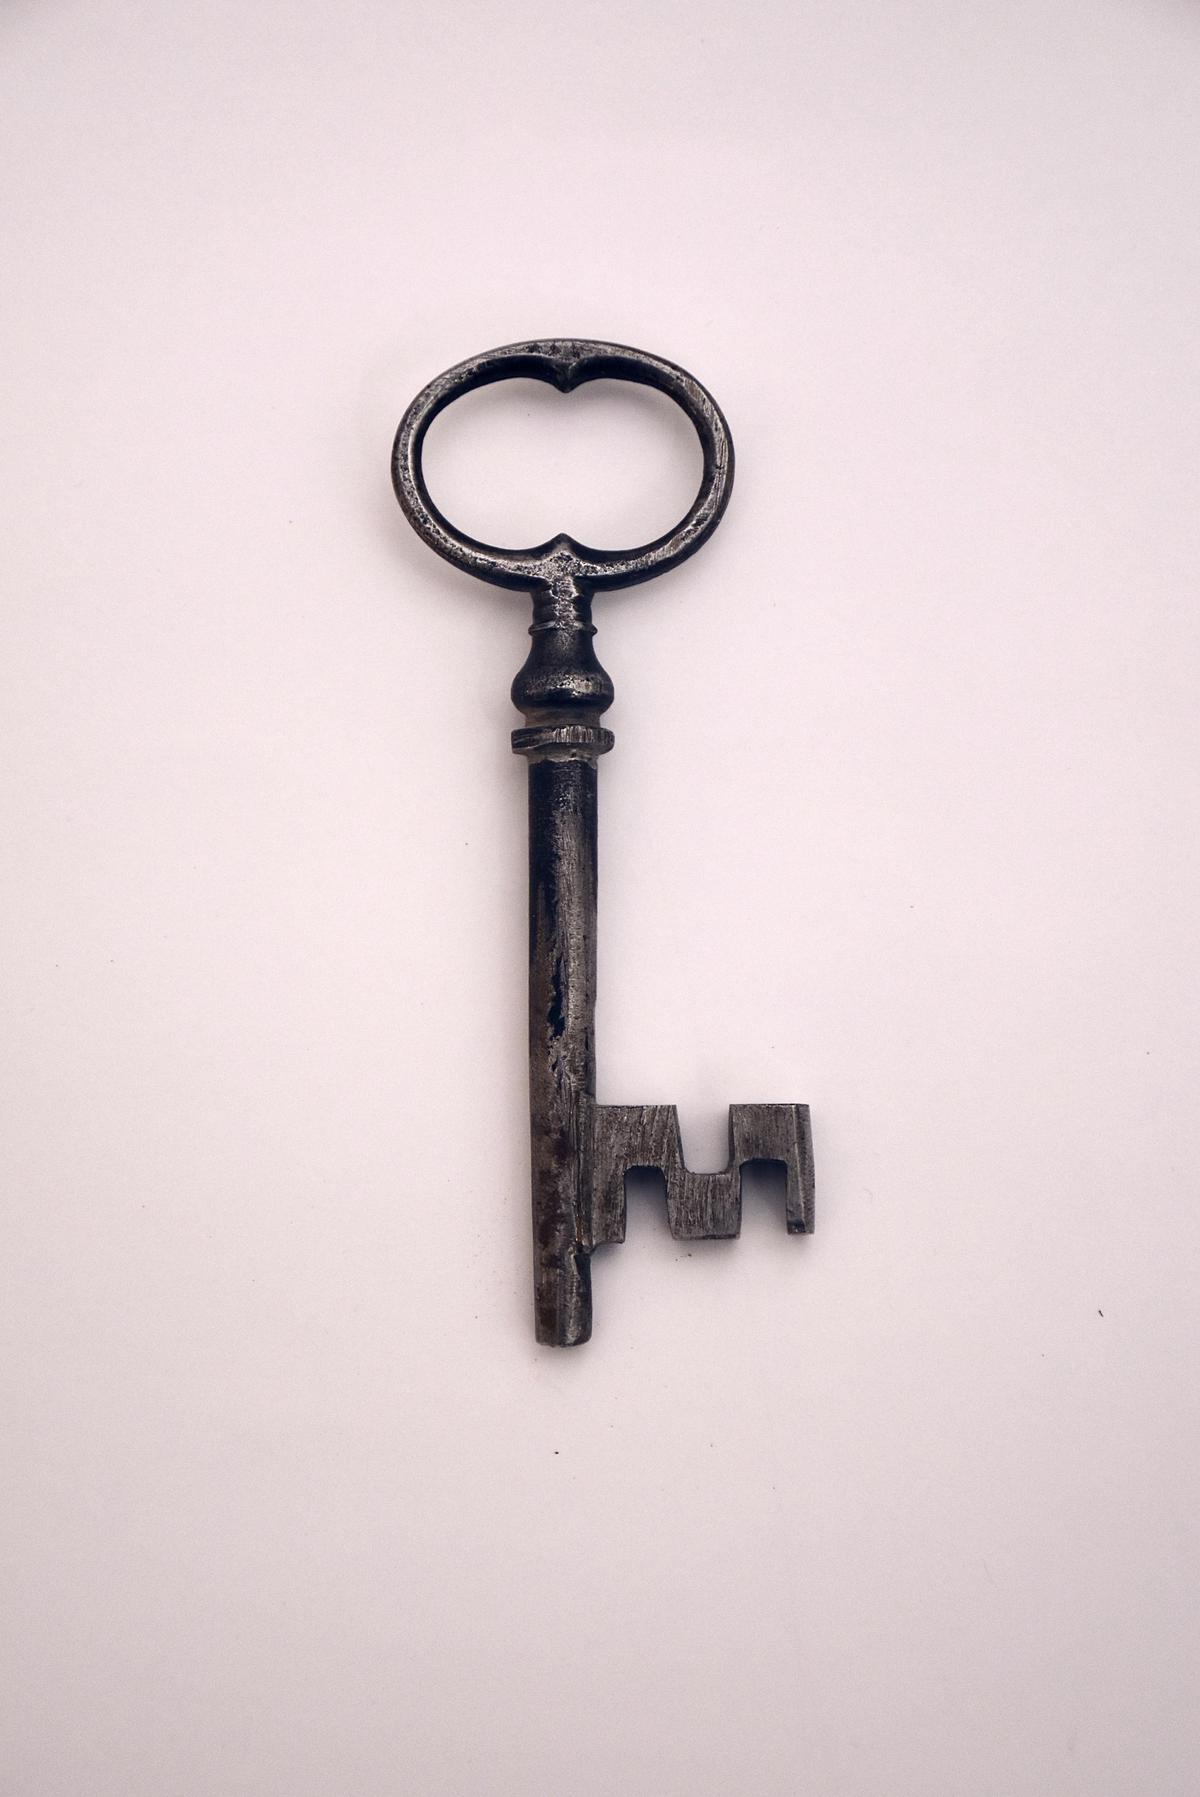 Illustration of a person facing a key and lock, symbolizing access key issues and troubleshooting.